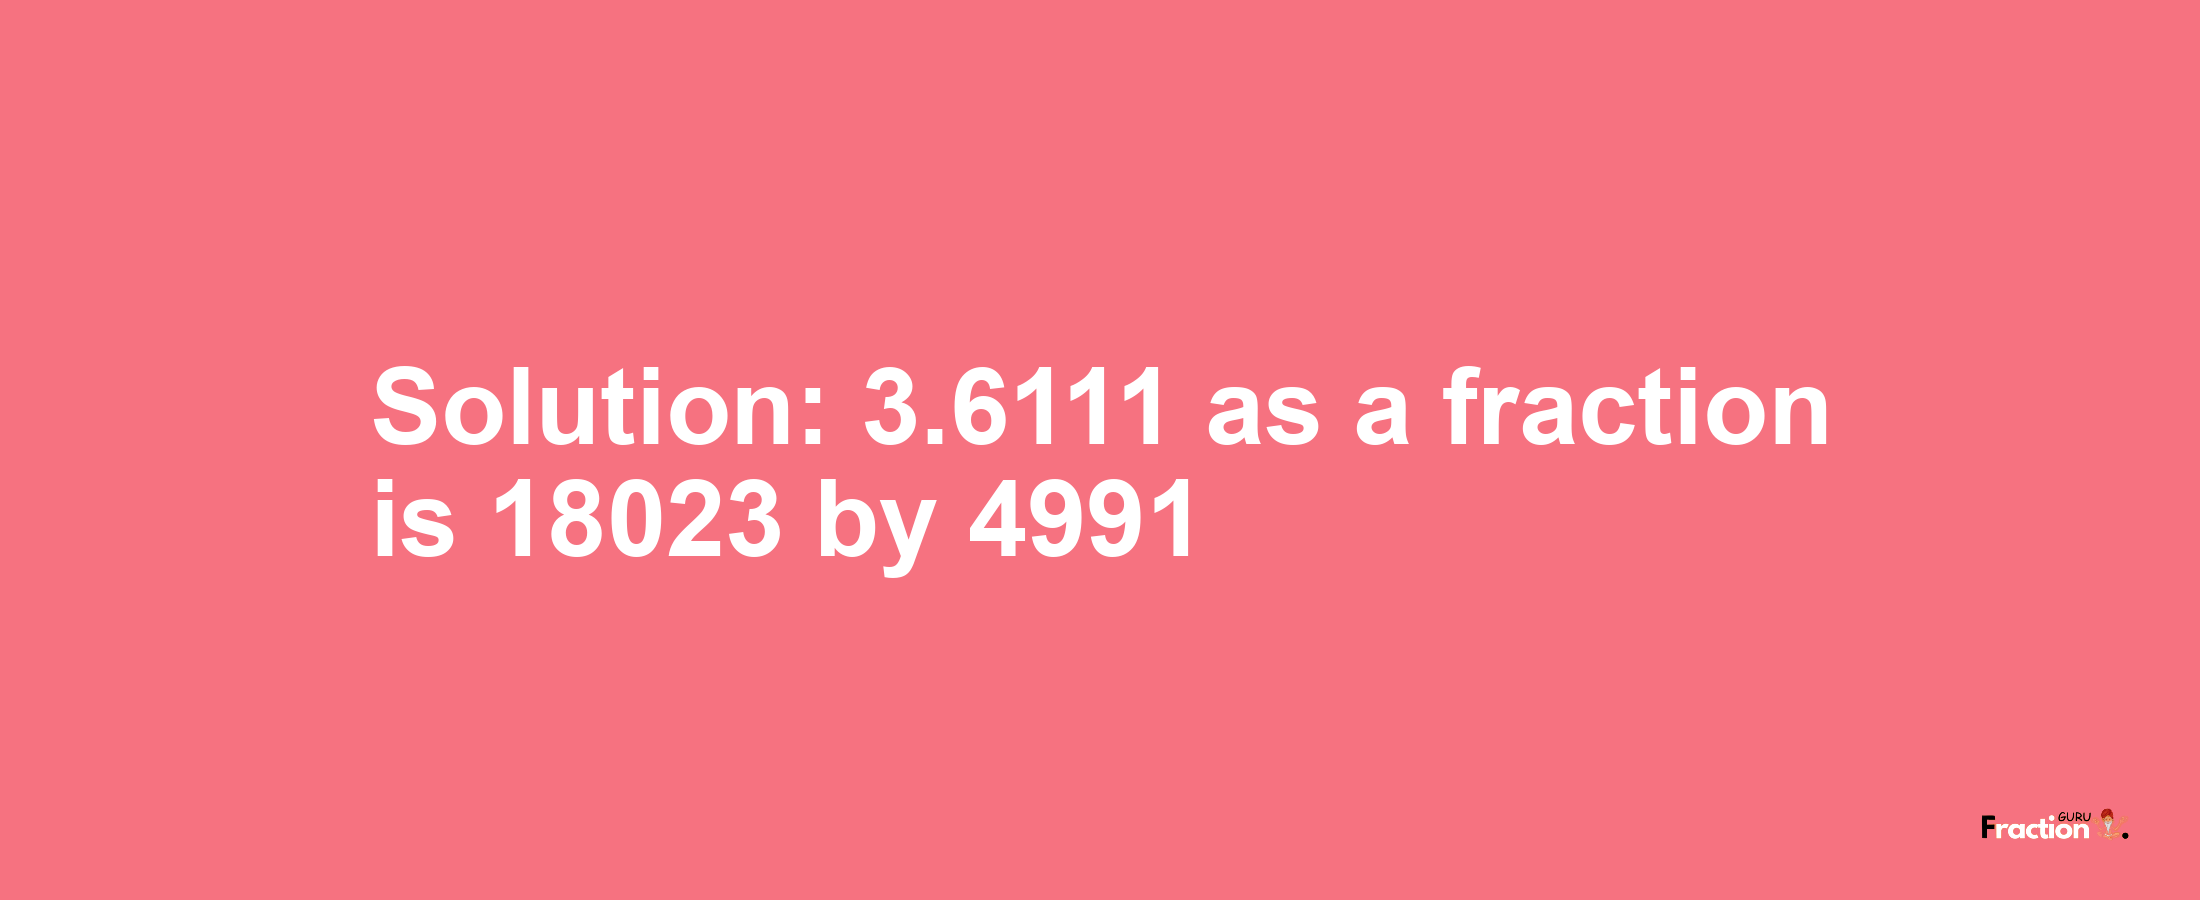 Solution:3.6111 as a fraction is 18023/4991